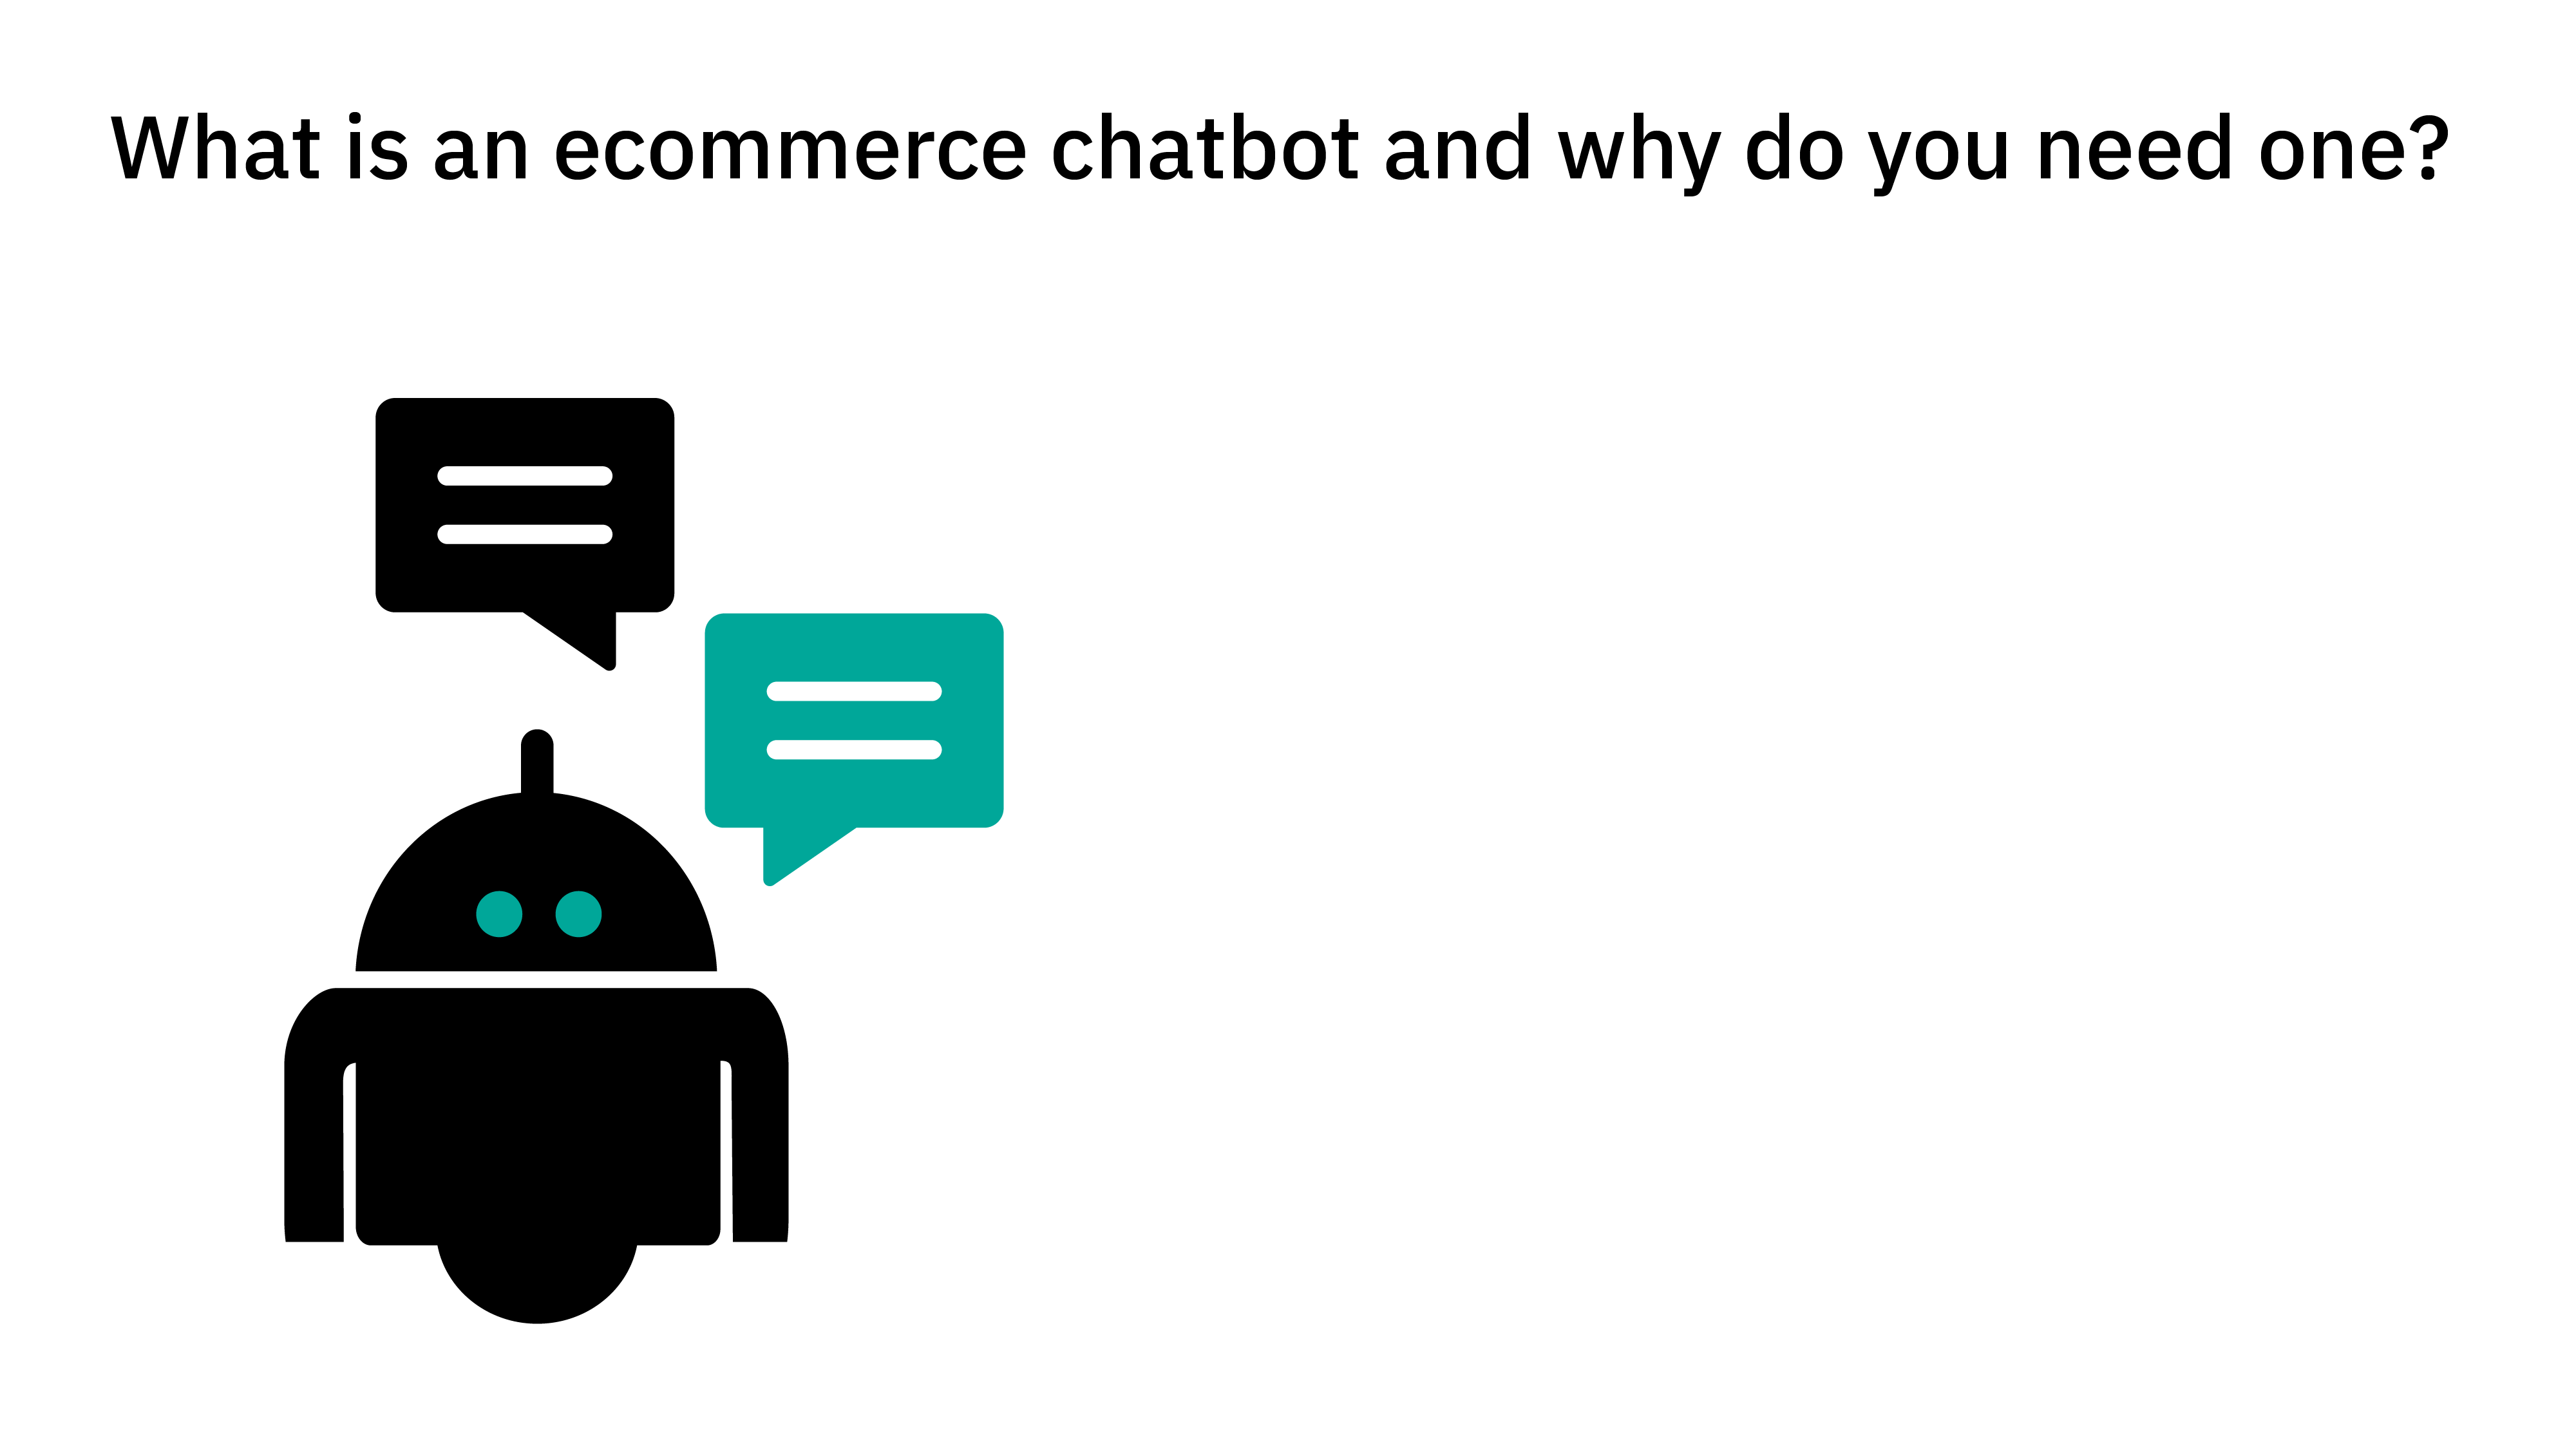 What is an ecommerce chatbot and why do you need one?